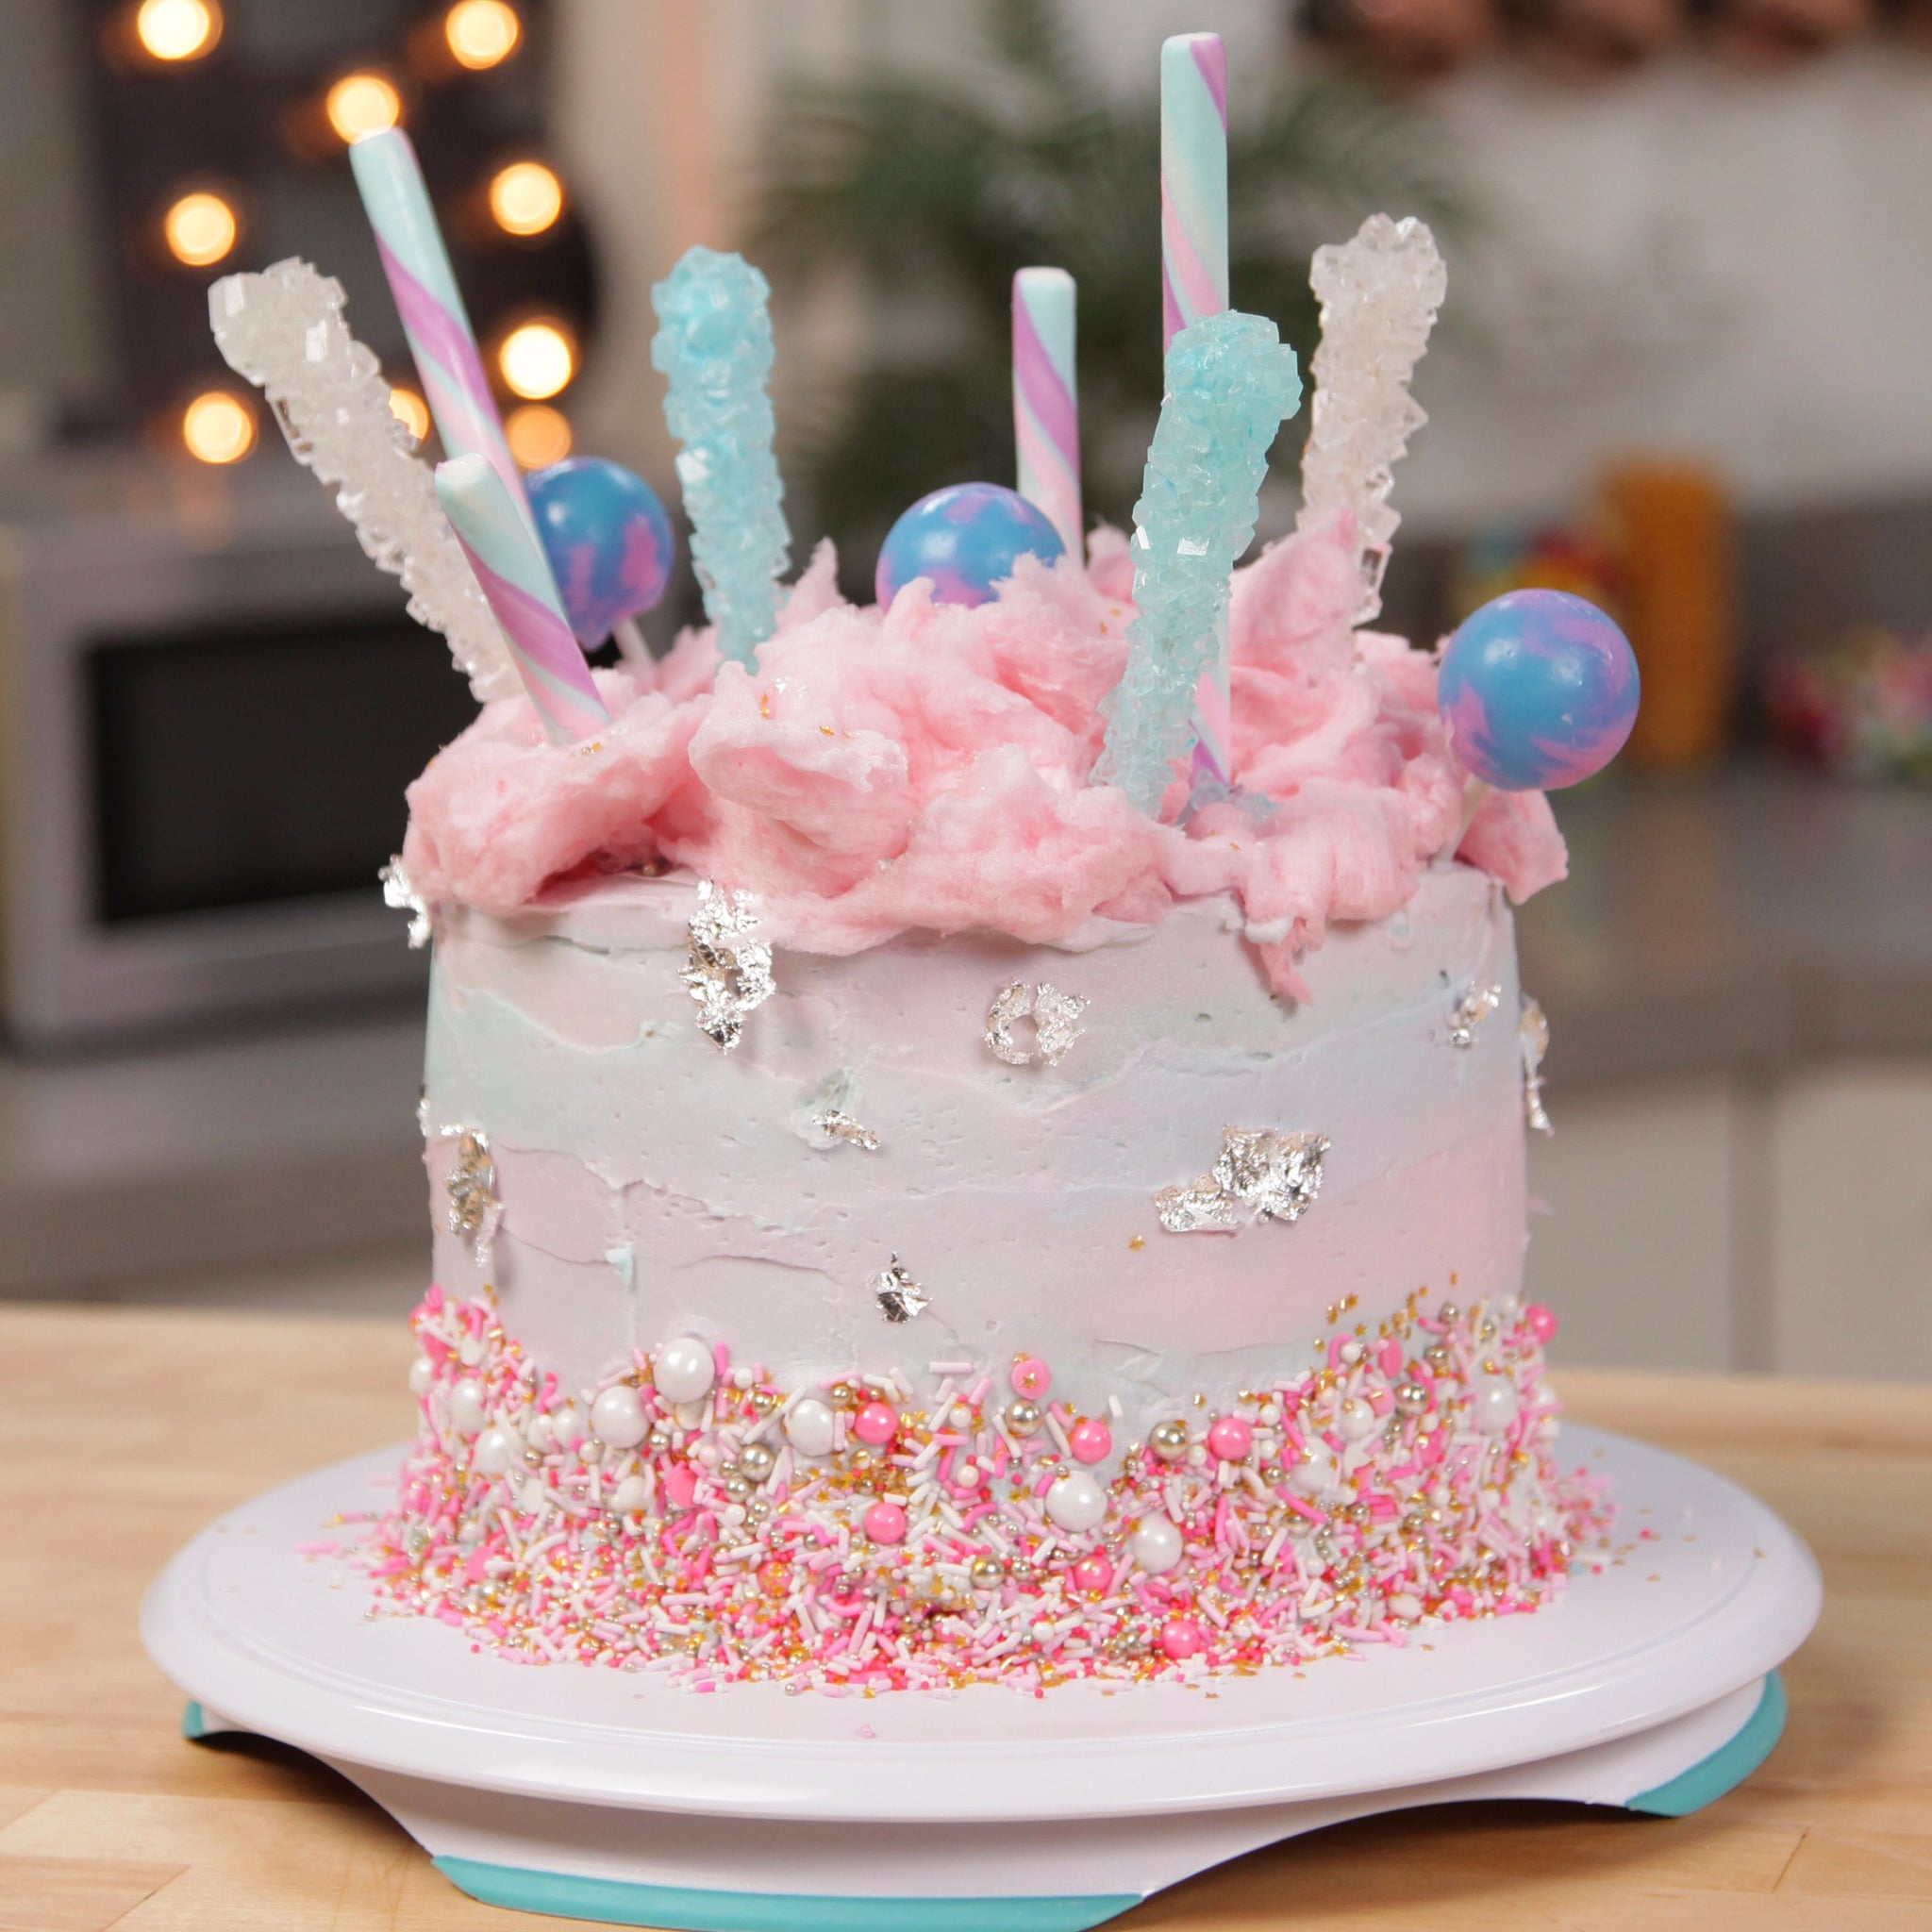 Shop for Fresh Layer Dripping Delicious Cake with Lots of Candies and  Lollipop online - Ambala